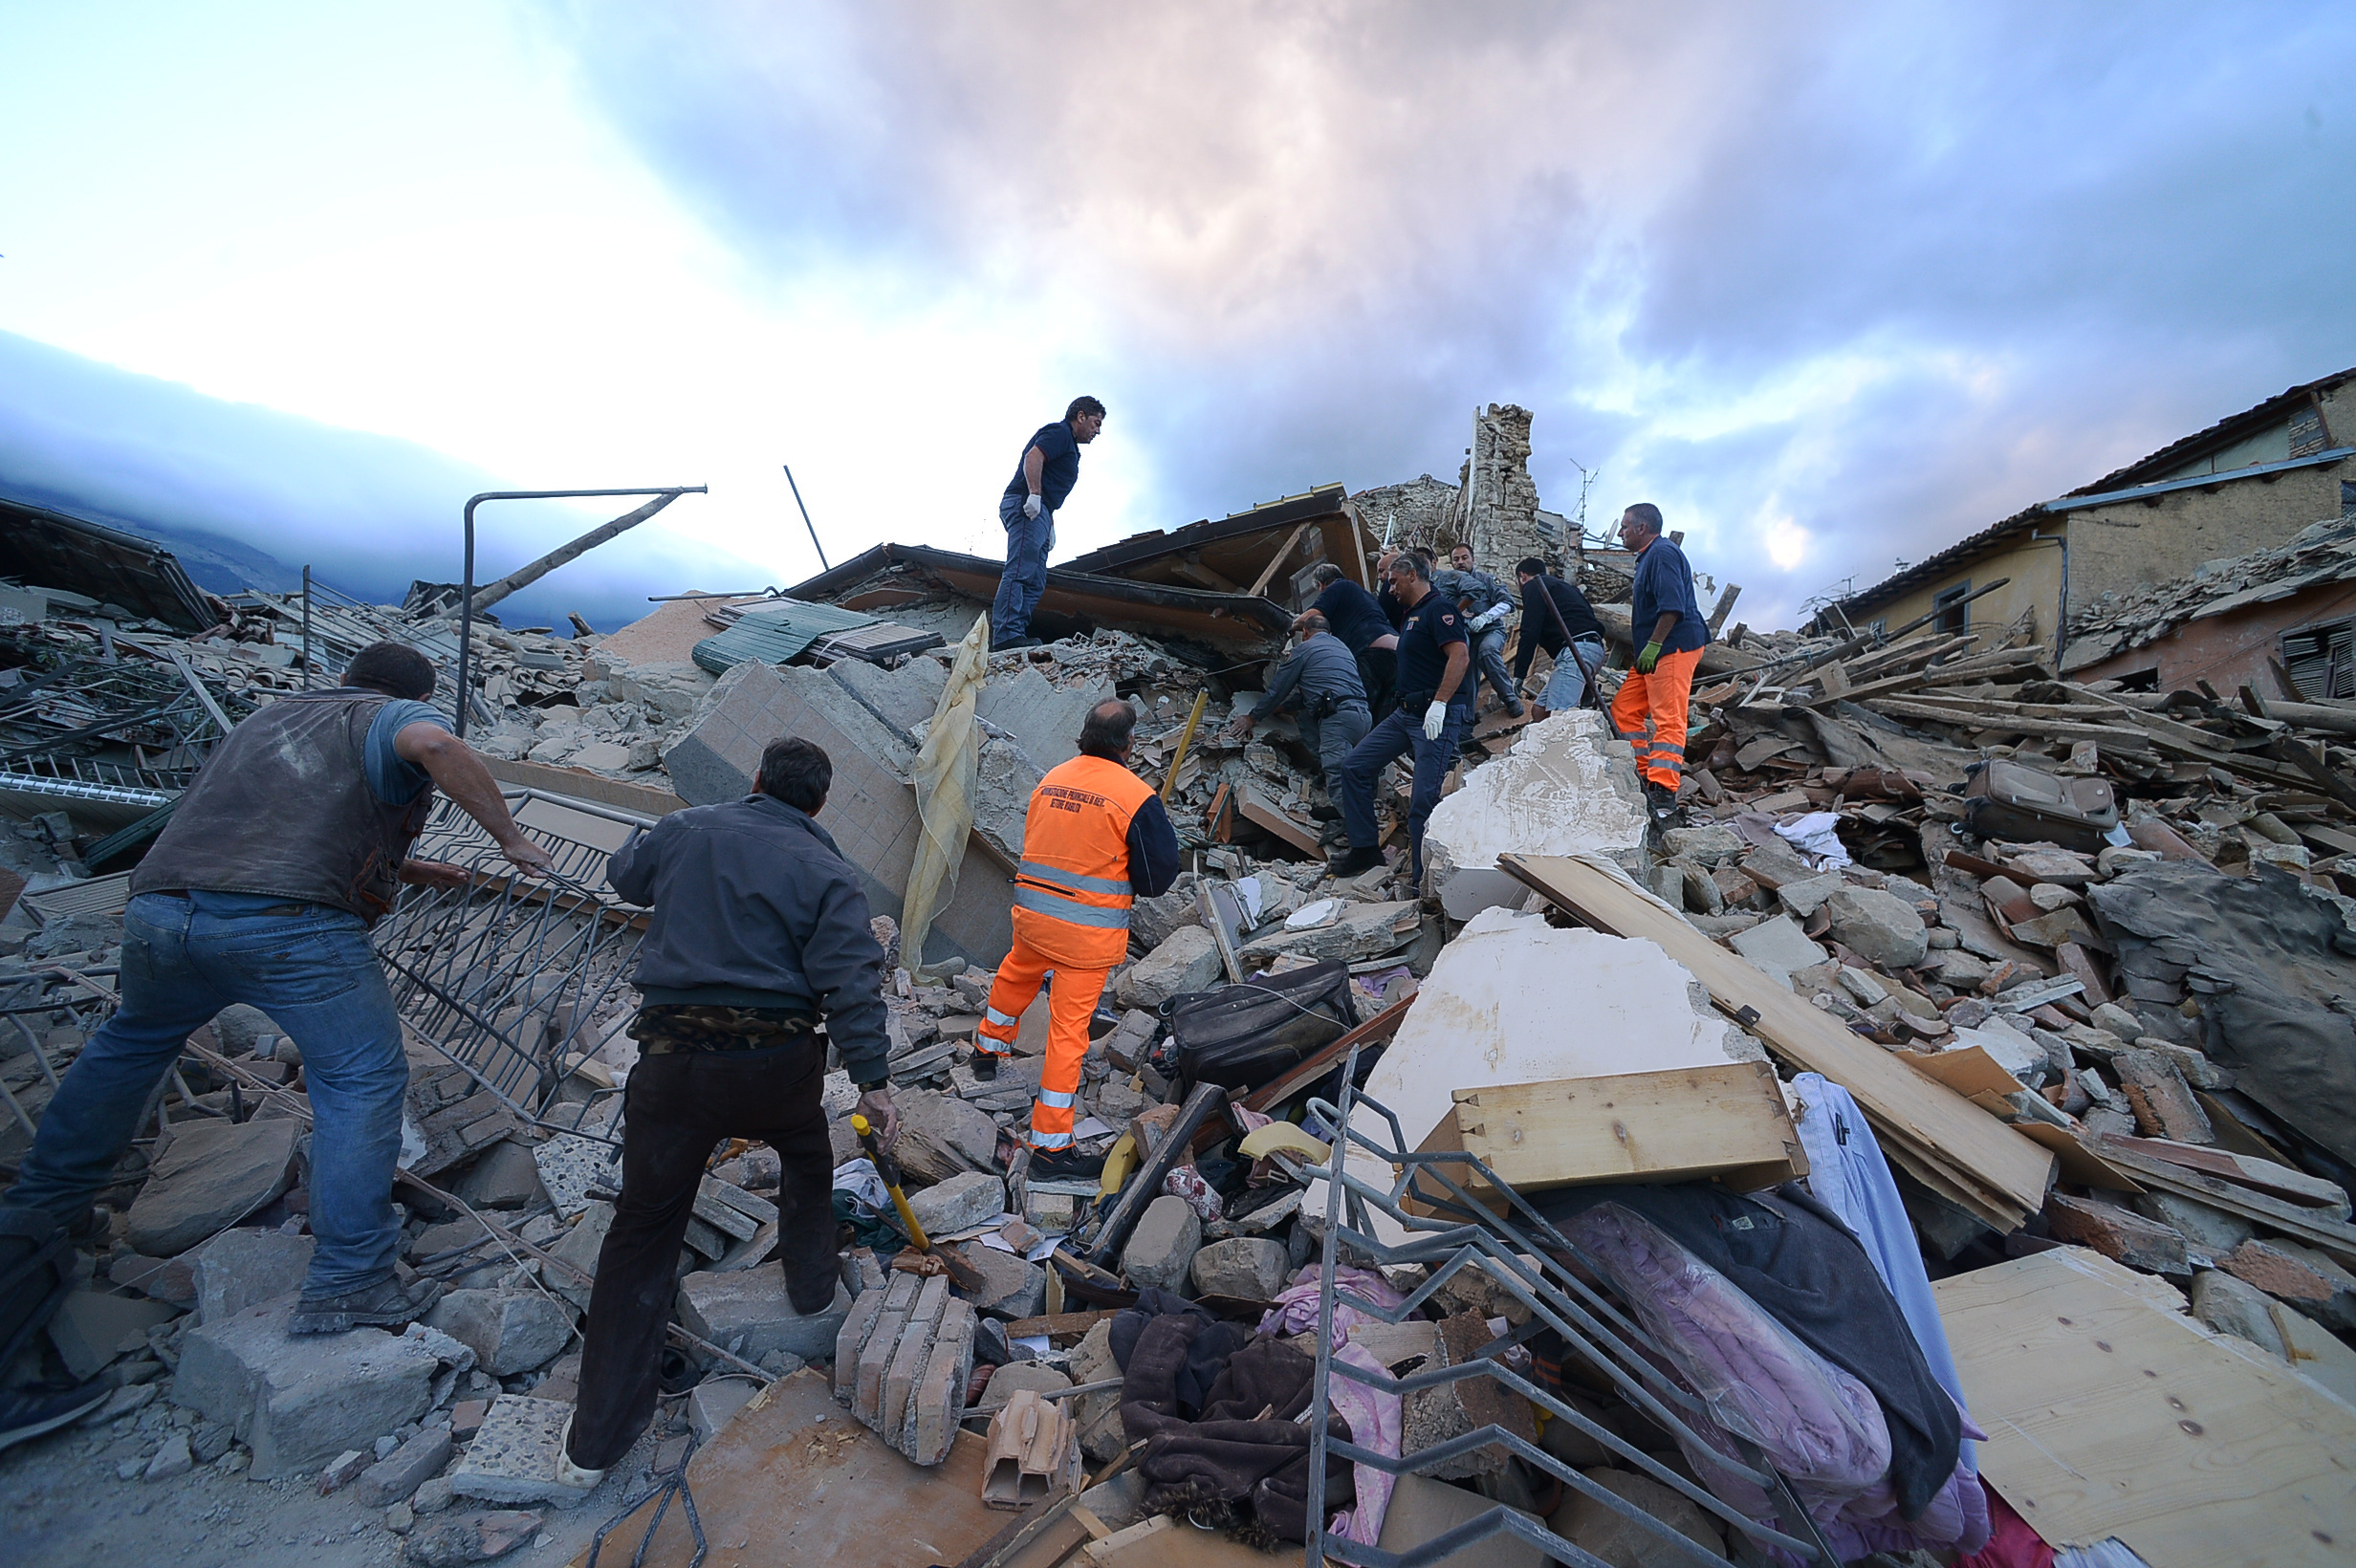 Resucers search for victims in damaged buildings after a strong heartquake hit Amatrice on August 24, 2016. Central Italy was struck by a powerful, 6.2-magnitude earthquake in the early hours, which has killed at least three people and devastated dozens of mountain villages. Numerous buildings had collapsed in communities close to the epicenter of the quake near the town of Norcia in the region of Umbria, witnesses told Italian media, with an increase in the death toll highly likely. / AFP PHOTO / FILIPPO MONTEFORTE